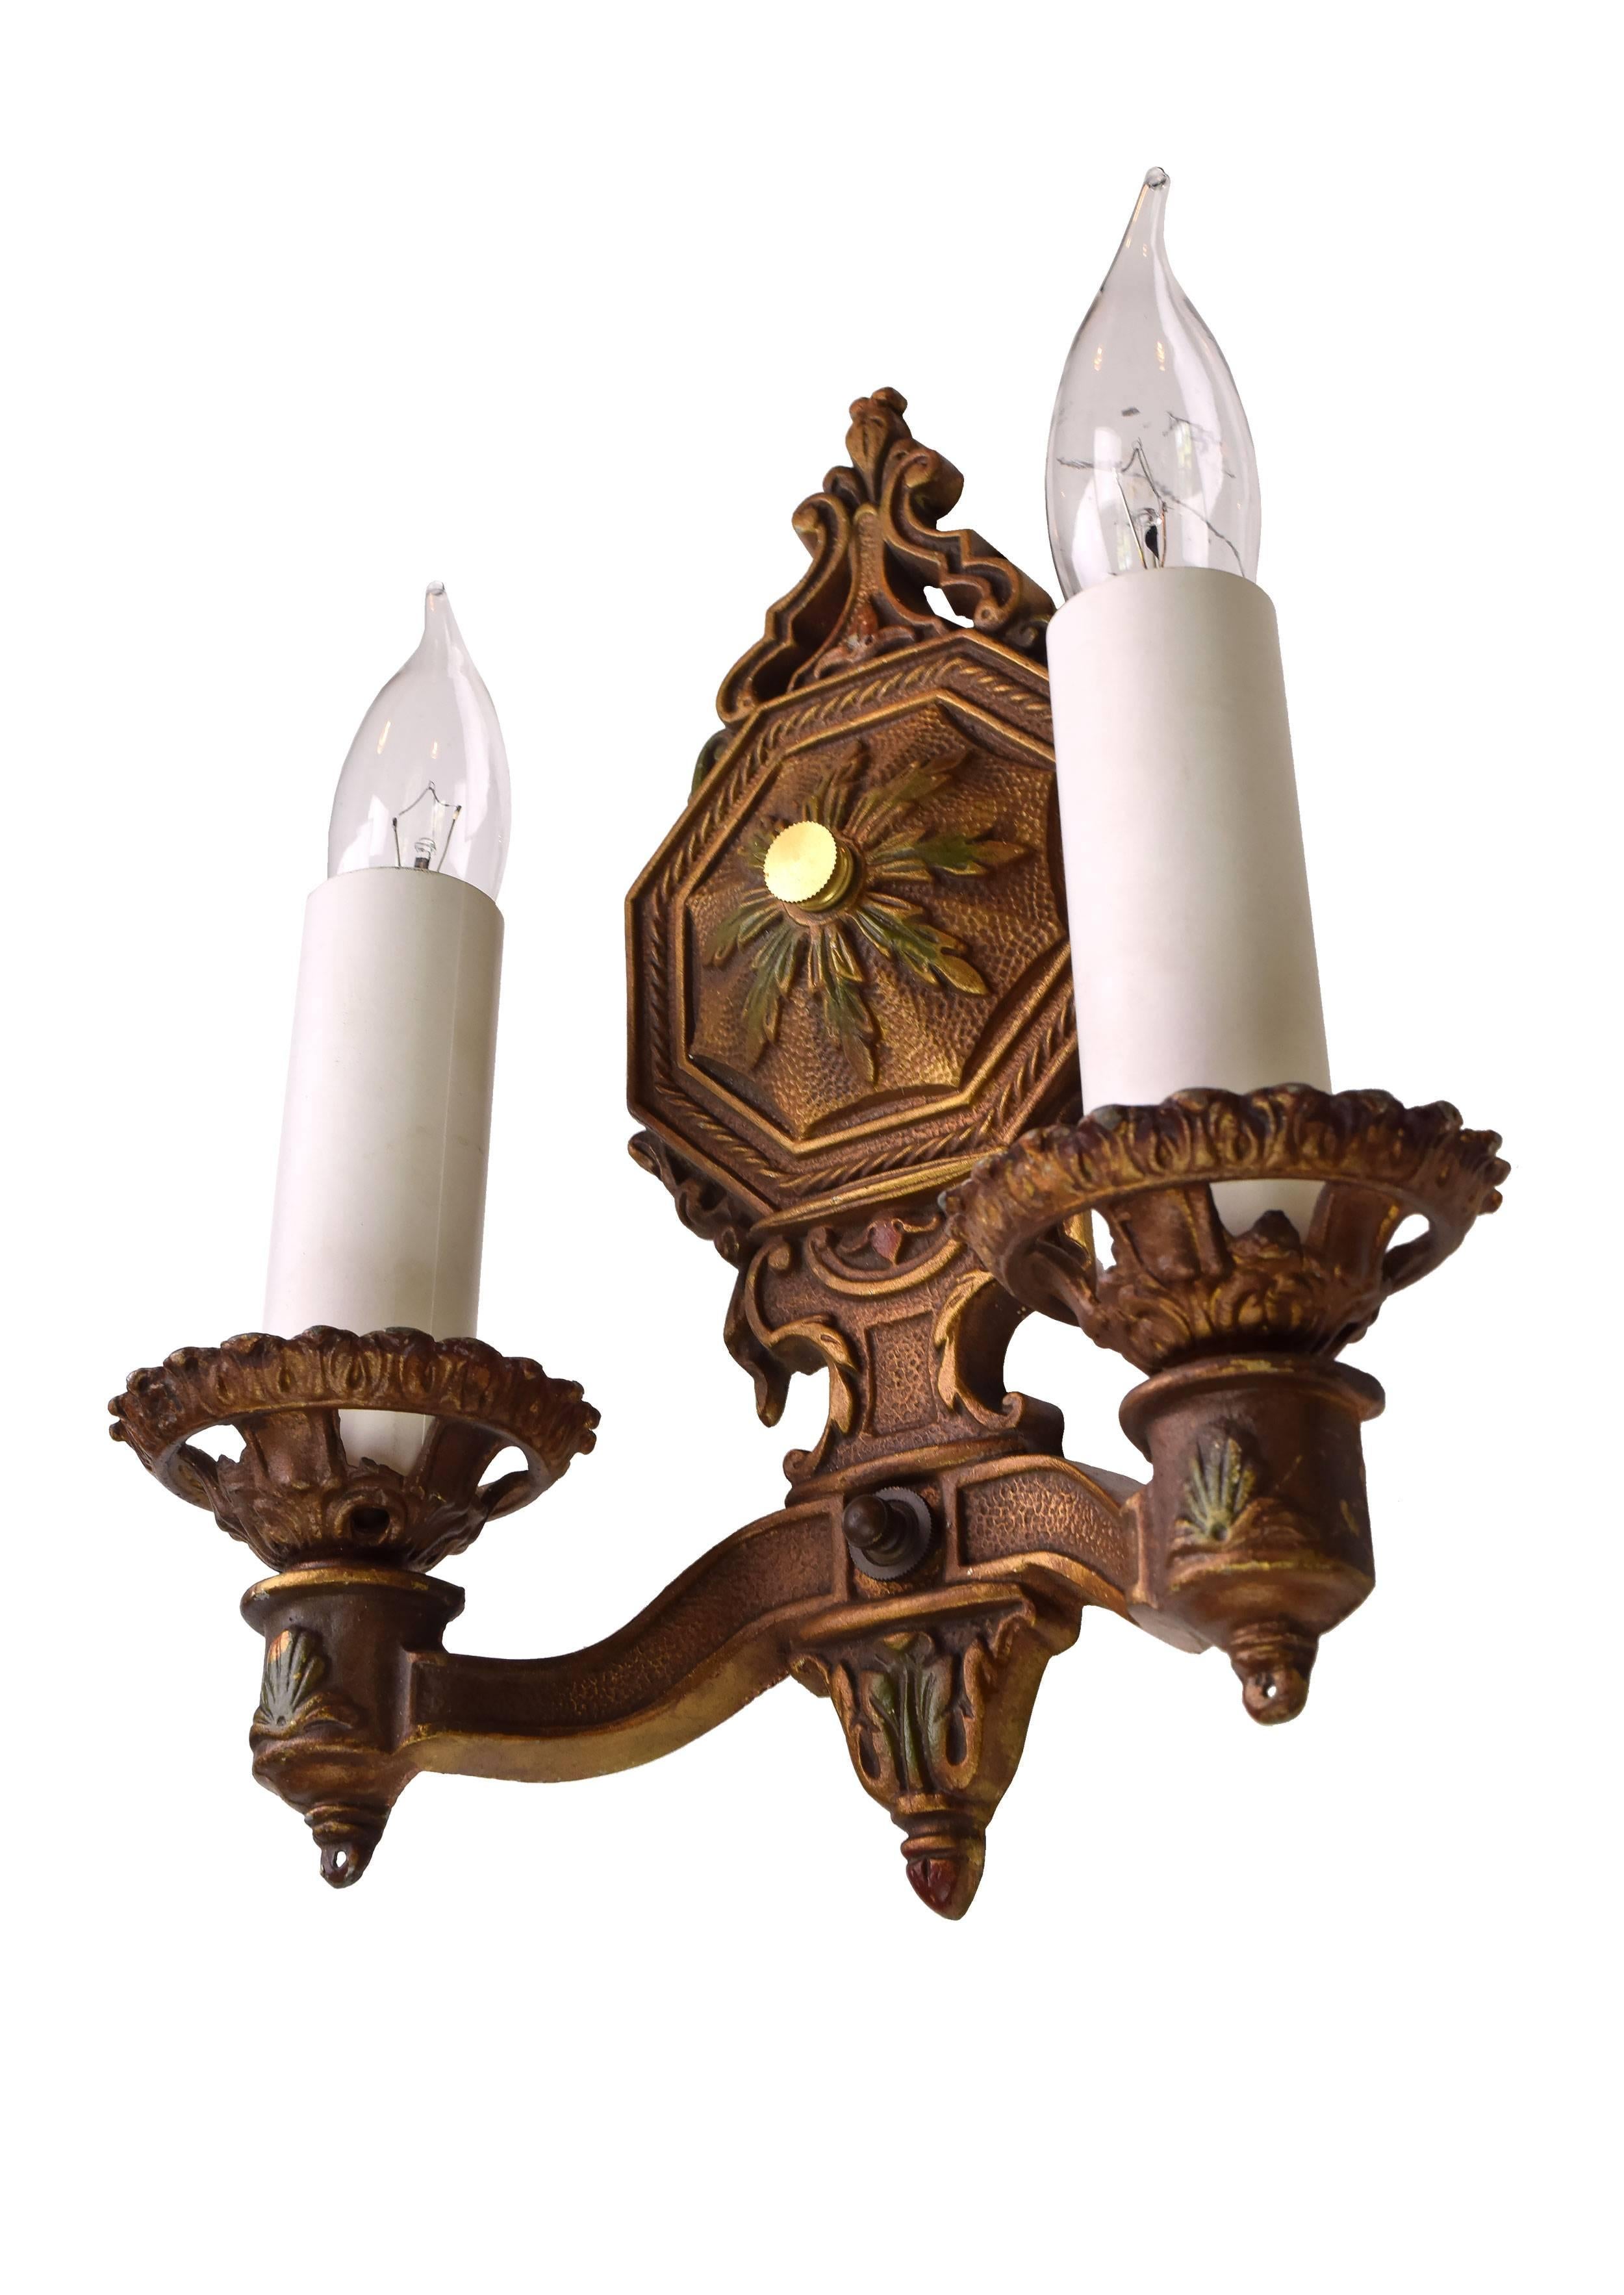 These stunning two-arm aluminium sconces have a beautiful coppery finish with subtle red and green details. Hammered metal and organic ornamentation add interest to each fixture. 

Two medium sockets

We find that early antique lighting was